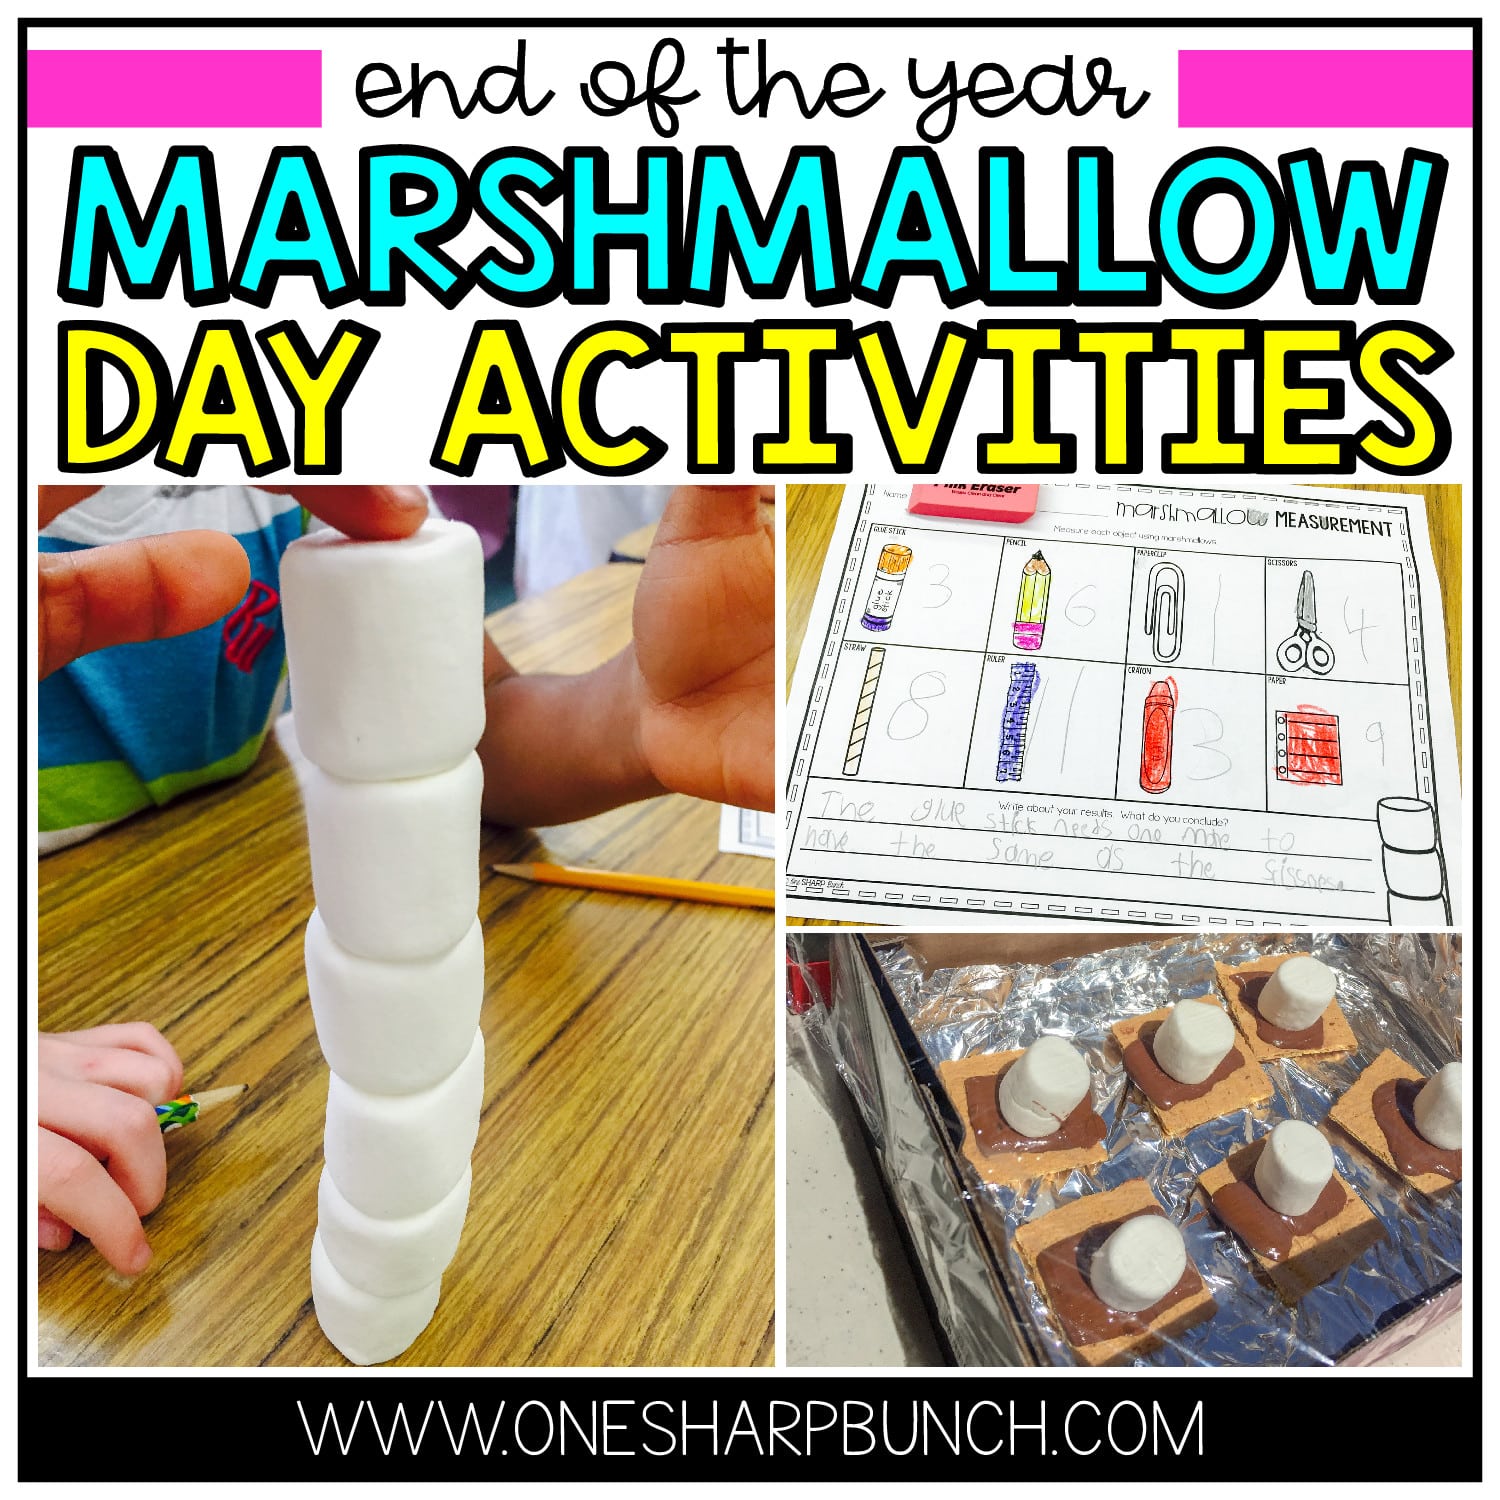 Celebrate the school year with these Marshmallow Day end of the year activities! Use these hands-on math and literacy activities to review skills and explore science concepts, during your end of the year countdown, end of the year theme days or end of the year party! Don’t forget to invite your preschool, kindergarten and 1st grade students to make solar s’mores, as you celebrate with these Camping Day activities! #endoftheyear #kindergarten #firstgrade #teacher #teachers #themedays #elementarty